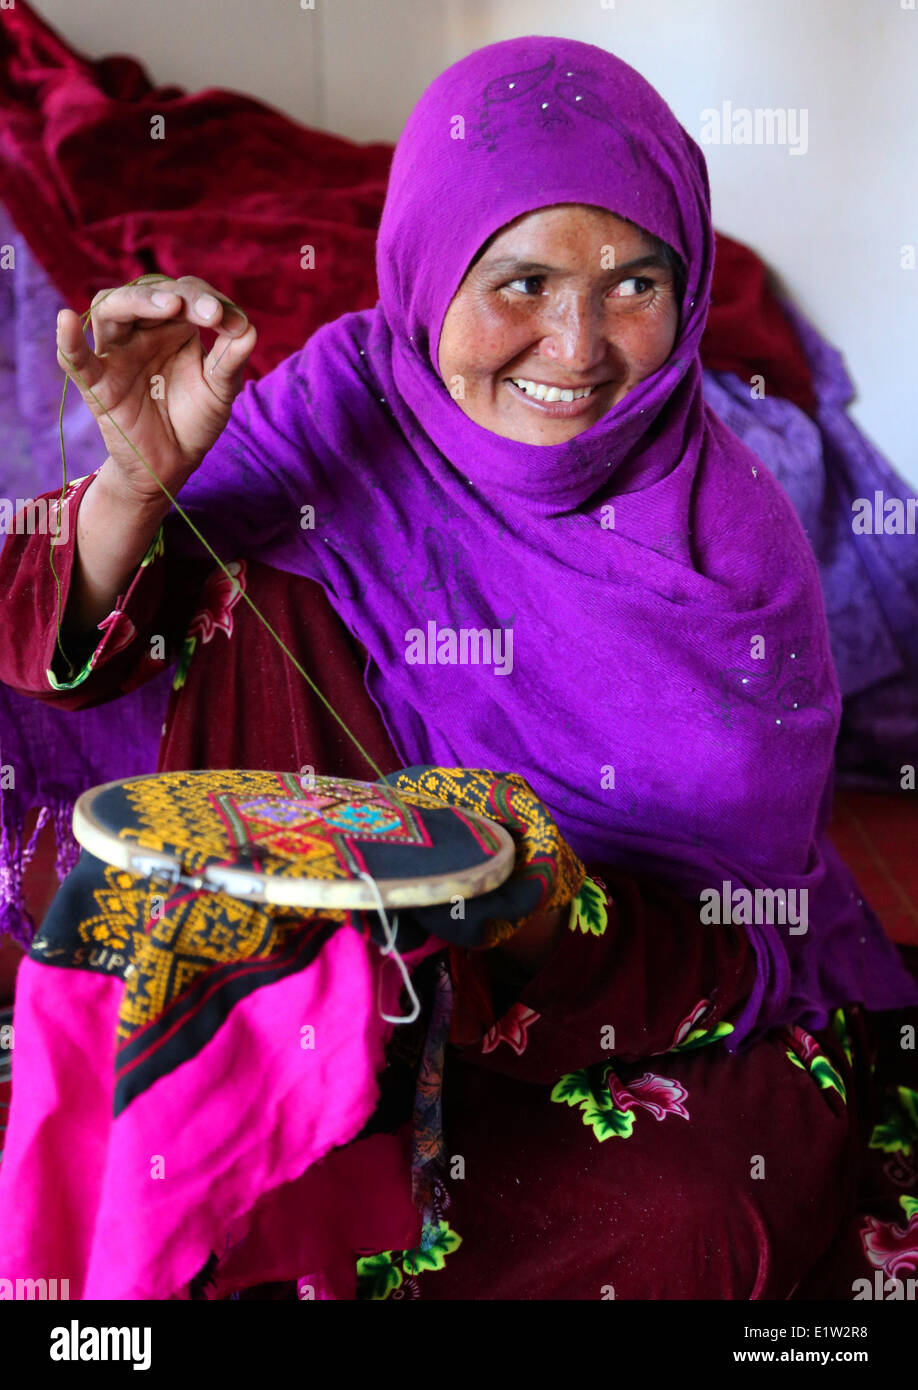 (140610) -- BAMYAN, June 10, 2 014.(Xinhua) -- An Afghan woman makes a traditional handicraft at a traditional dress-making factory in Bamyan province, Afghanistan, June 10, 2014. (Xinhua/Kamran) Stock Photo